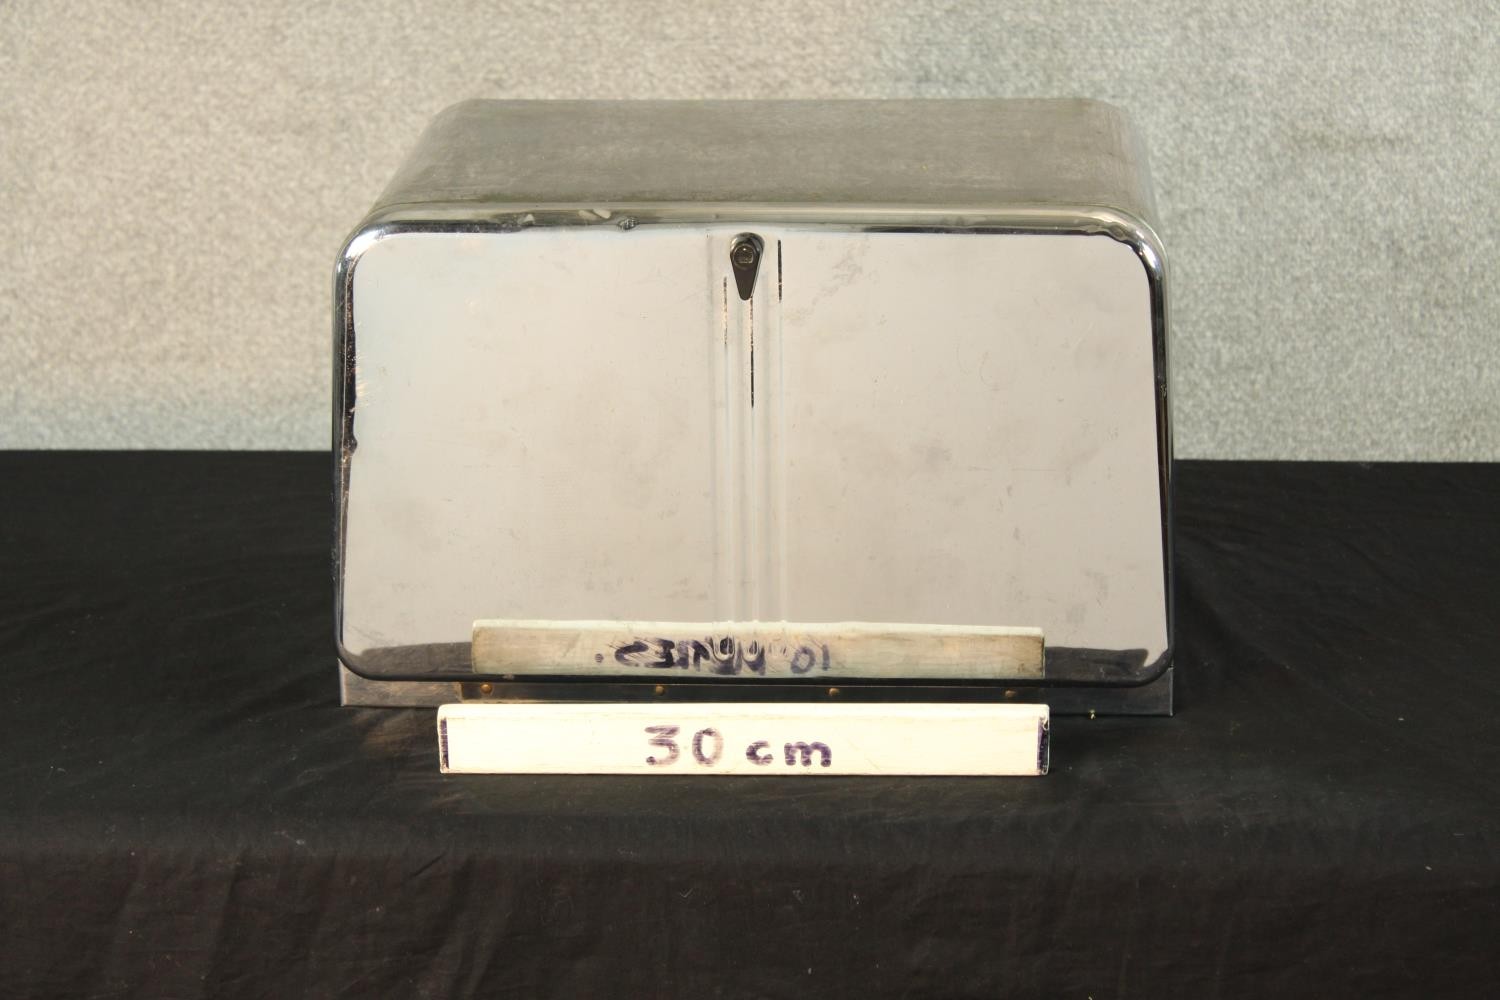 A mid 20th century chrome plated bread storage bin with internal shelf, vent holes and front - Image 2 of 5